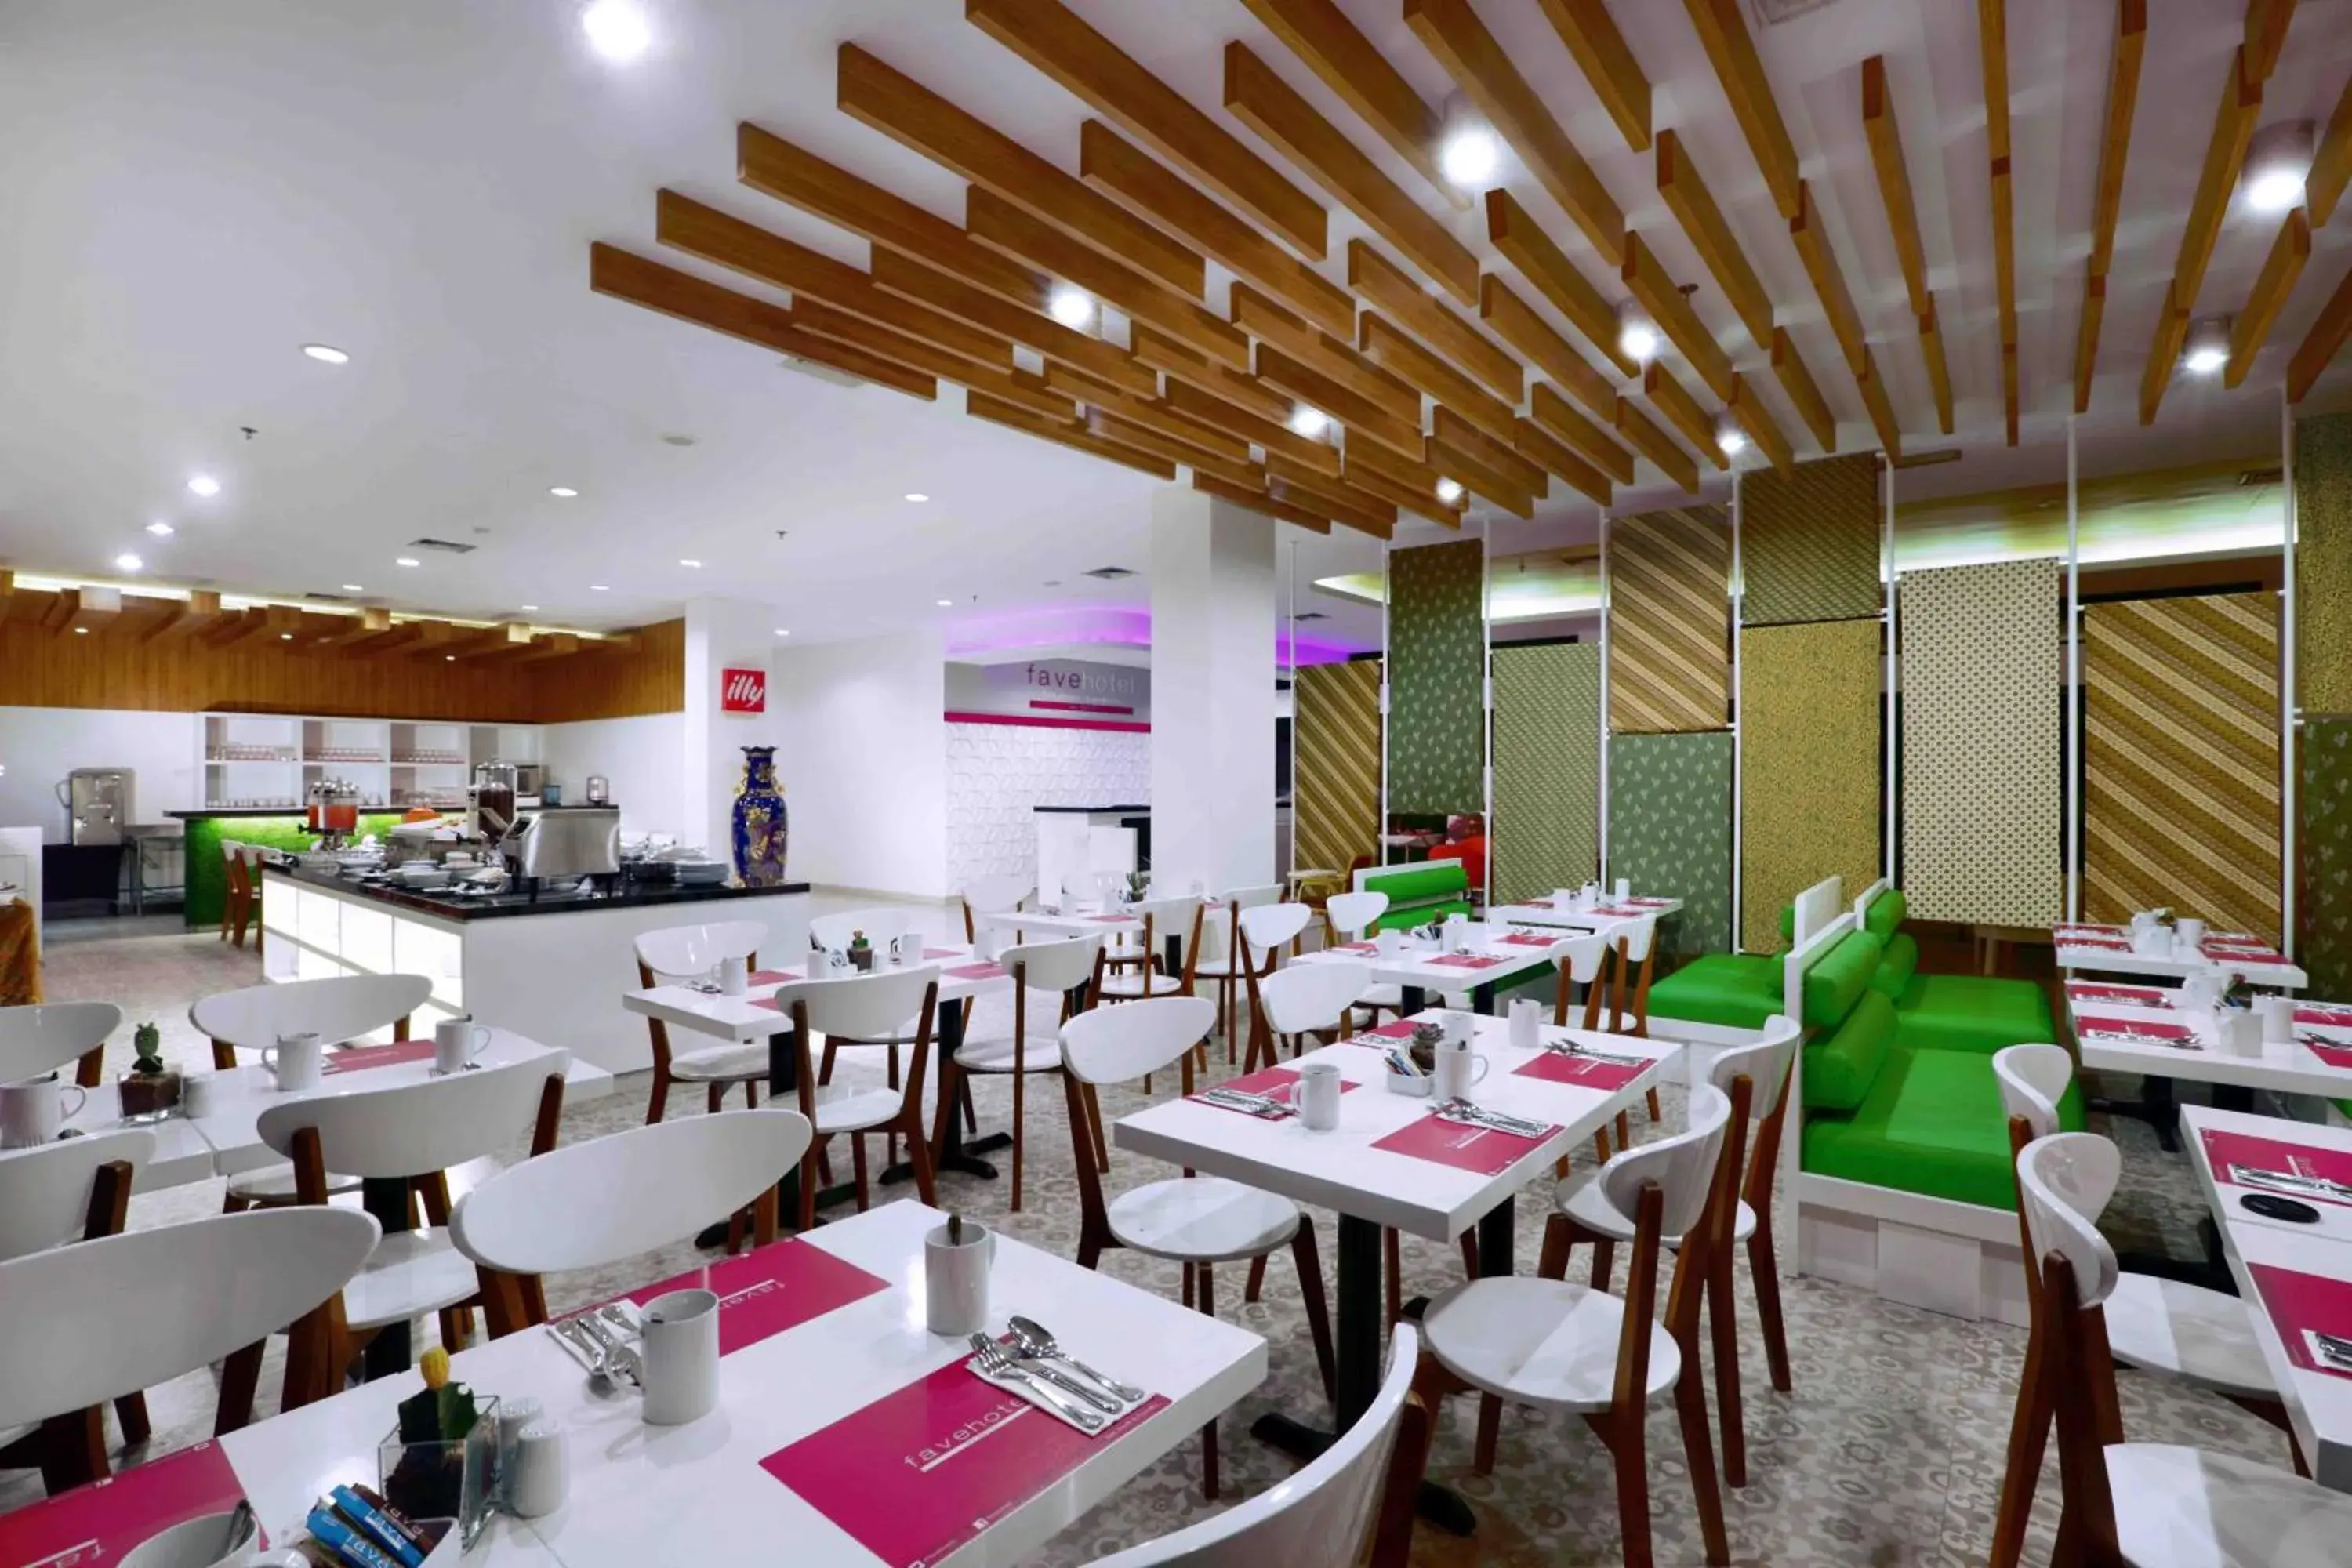 Restaurant/Places to Eat in Favehotel Malioboro